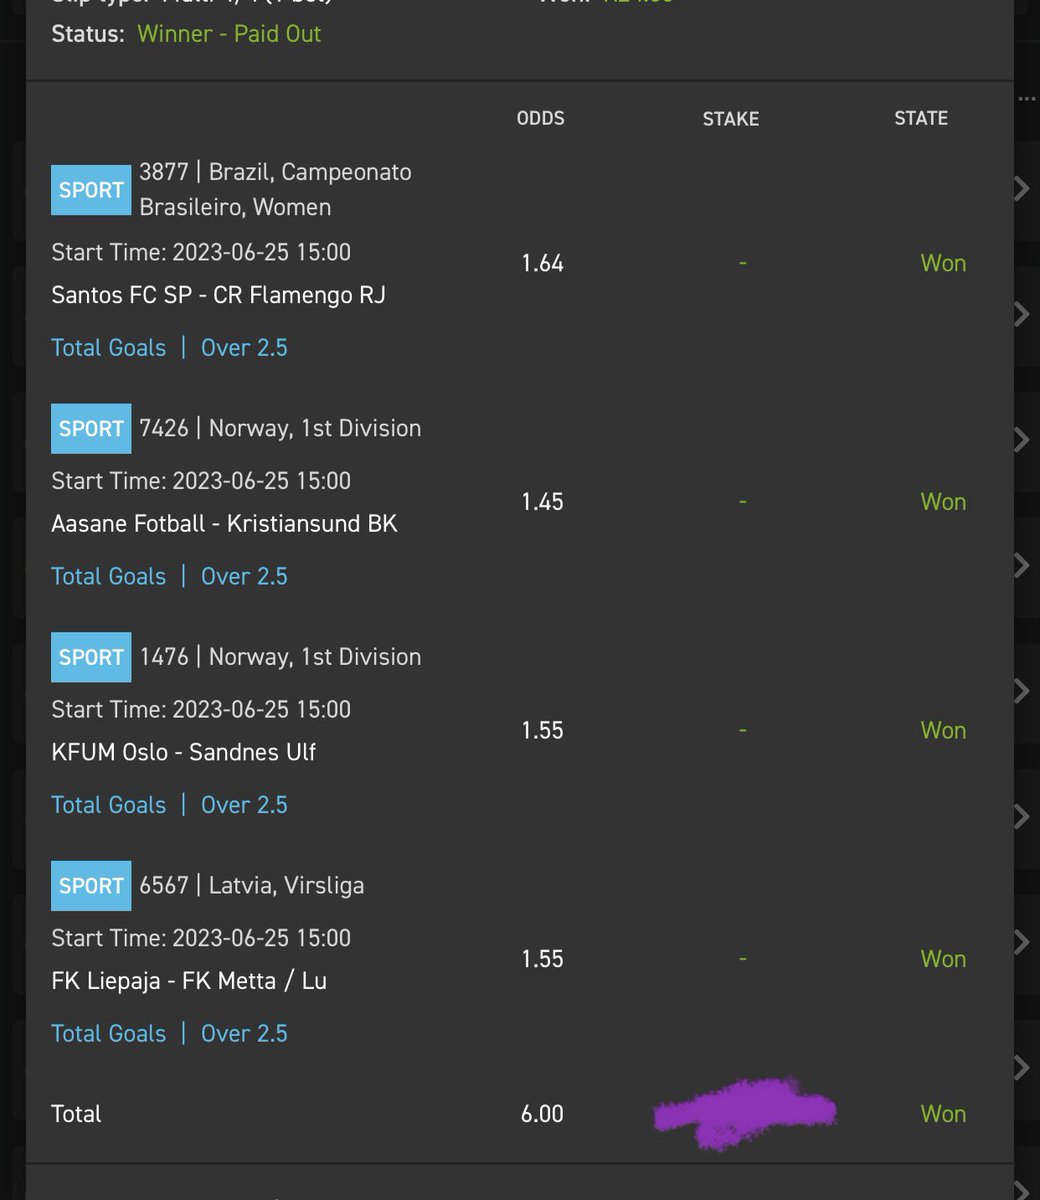 Booom boom booom 💥💥💥💥💥💥💥💥💥💥💥 Our 6 odds delivered. Congratulations if you played 🤑🤑🤑🐝🐝🐝🚀🚀🚀 ##YellowArmy #YellowNation #EasybetSA 💛🌖🥳